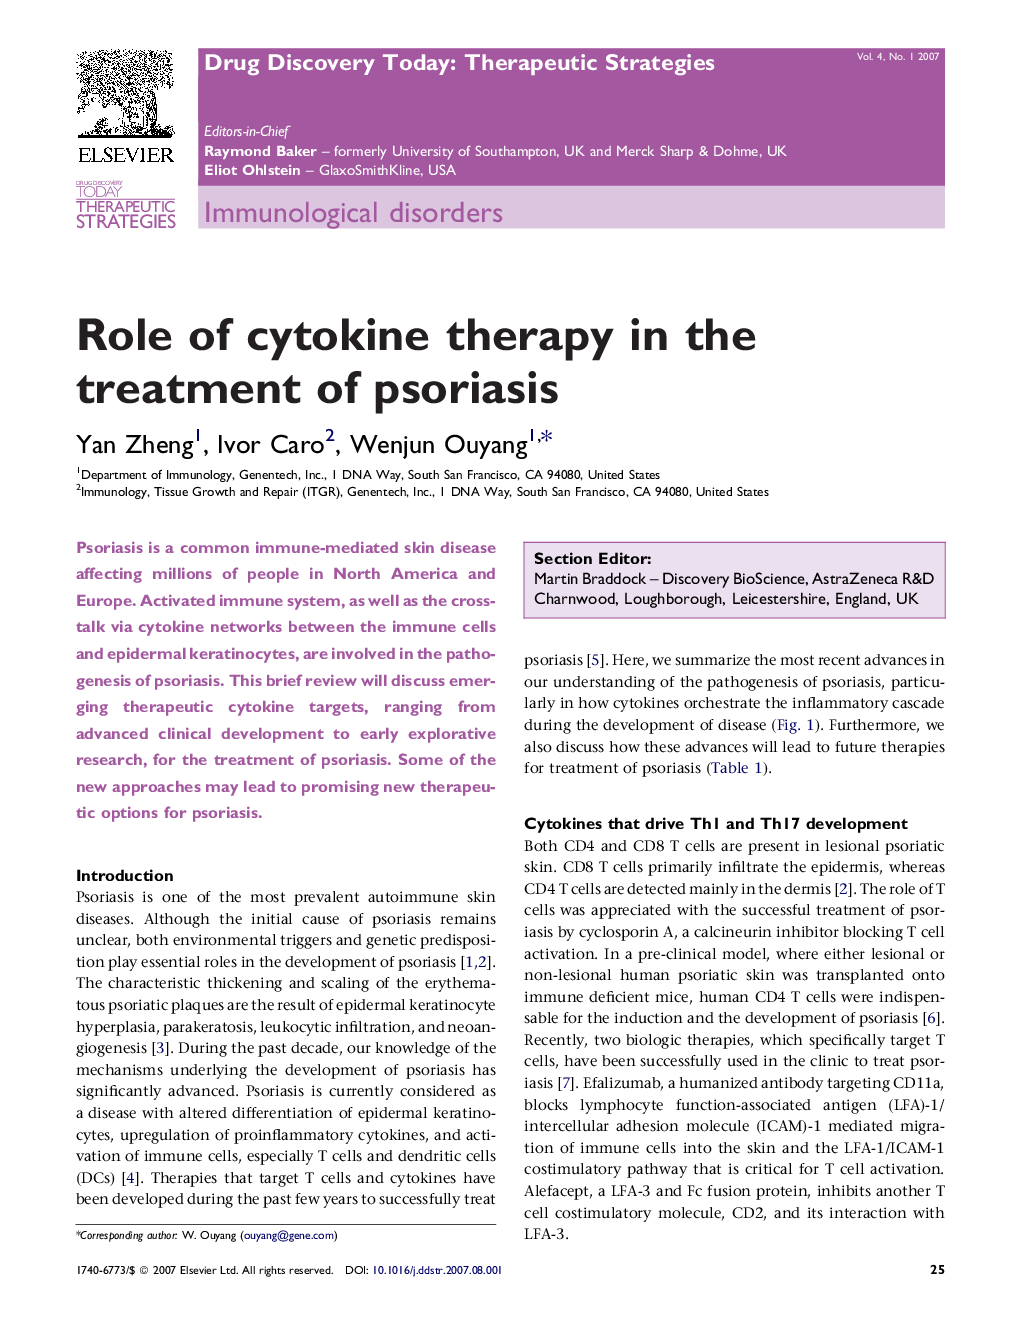 Role of cytokine therapy in the treatment of psoriasis